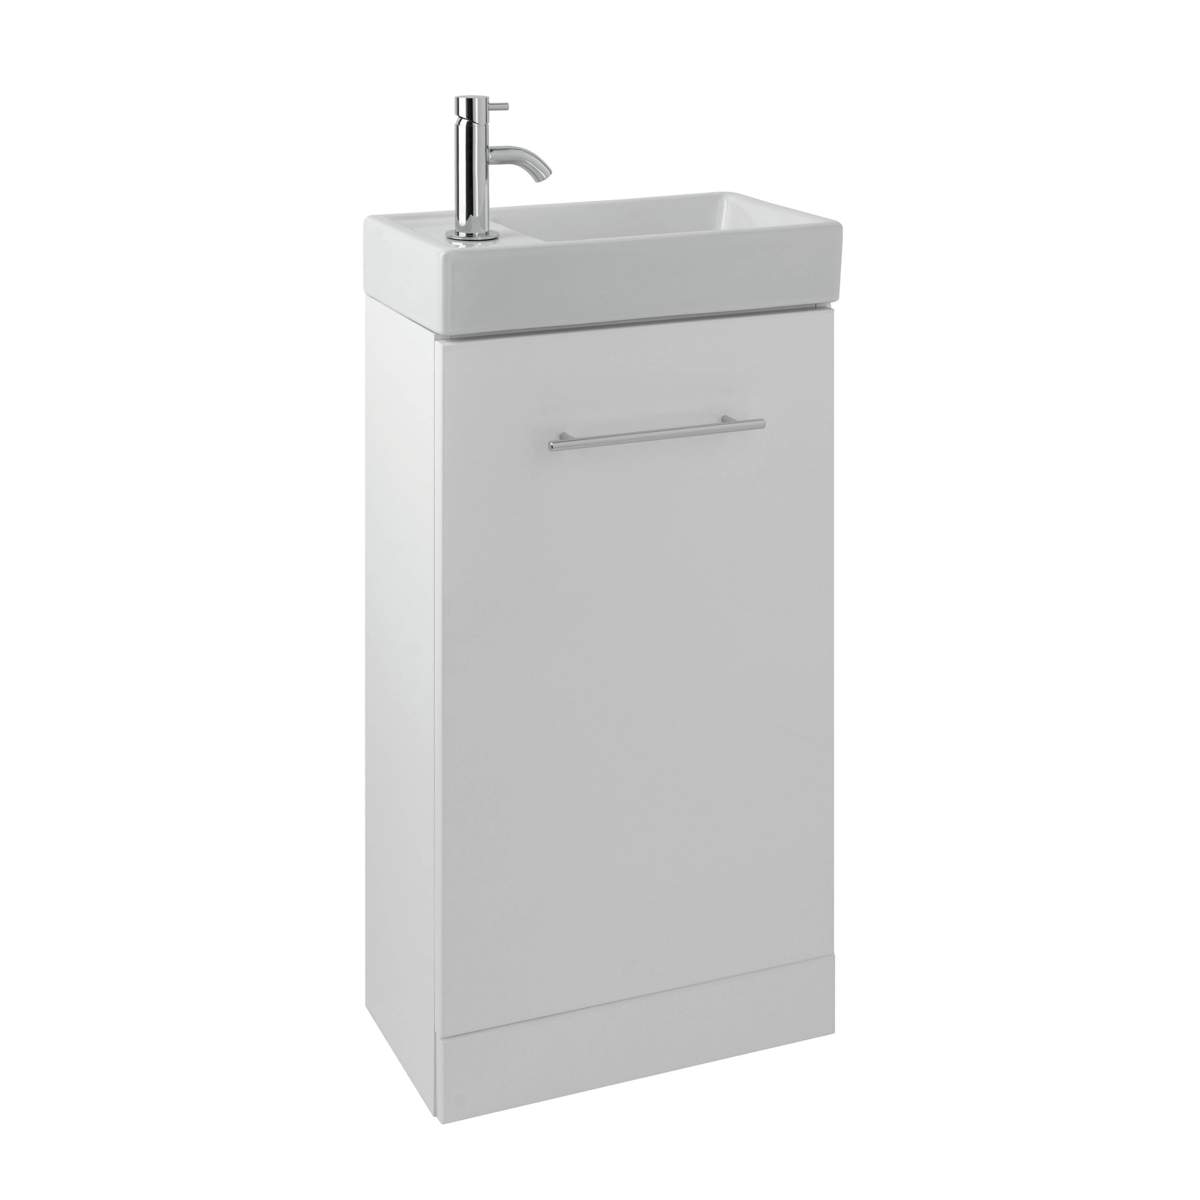 JTP Pace Units 400mm Floor Mounted Unit with Basin in White (PFS402W + P400BS)